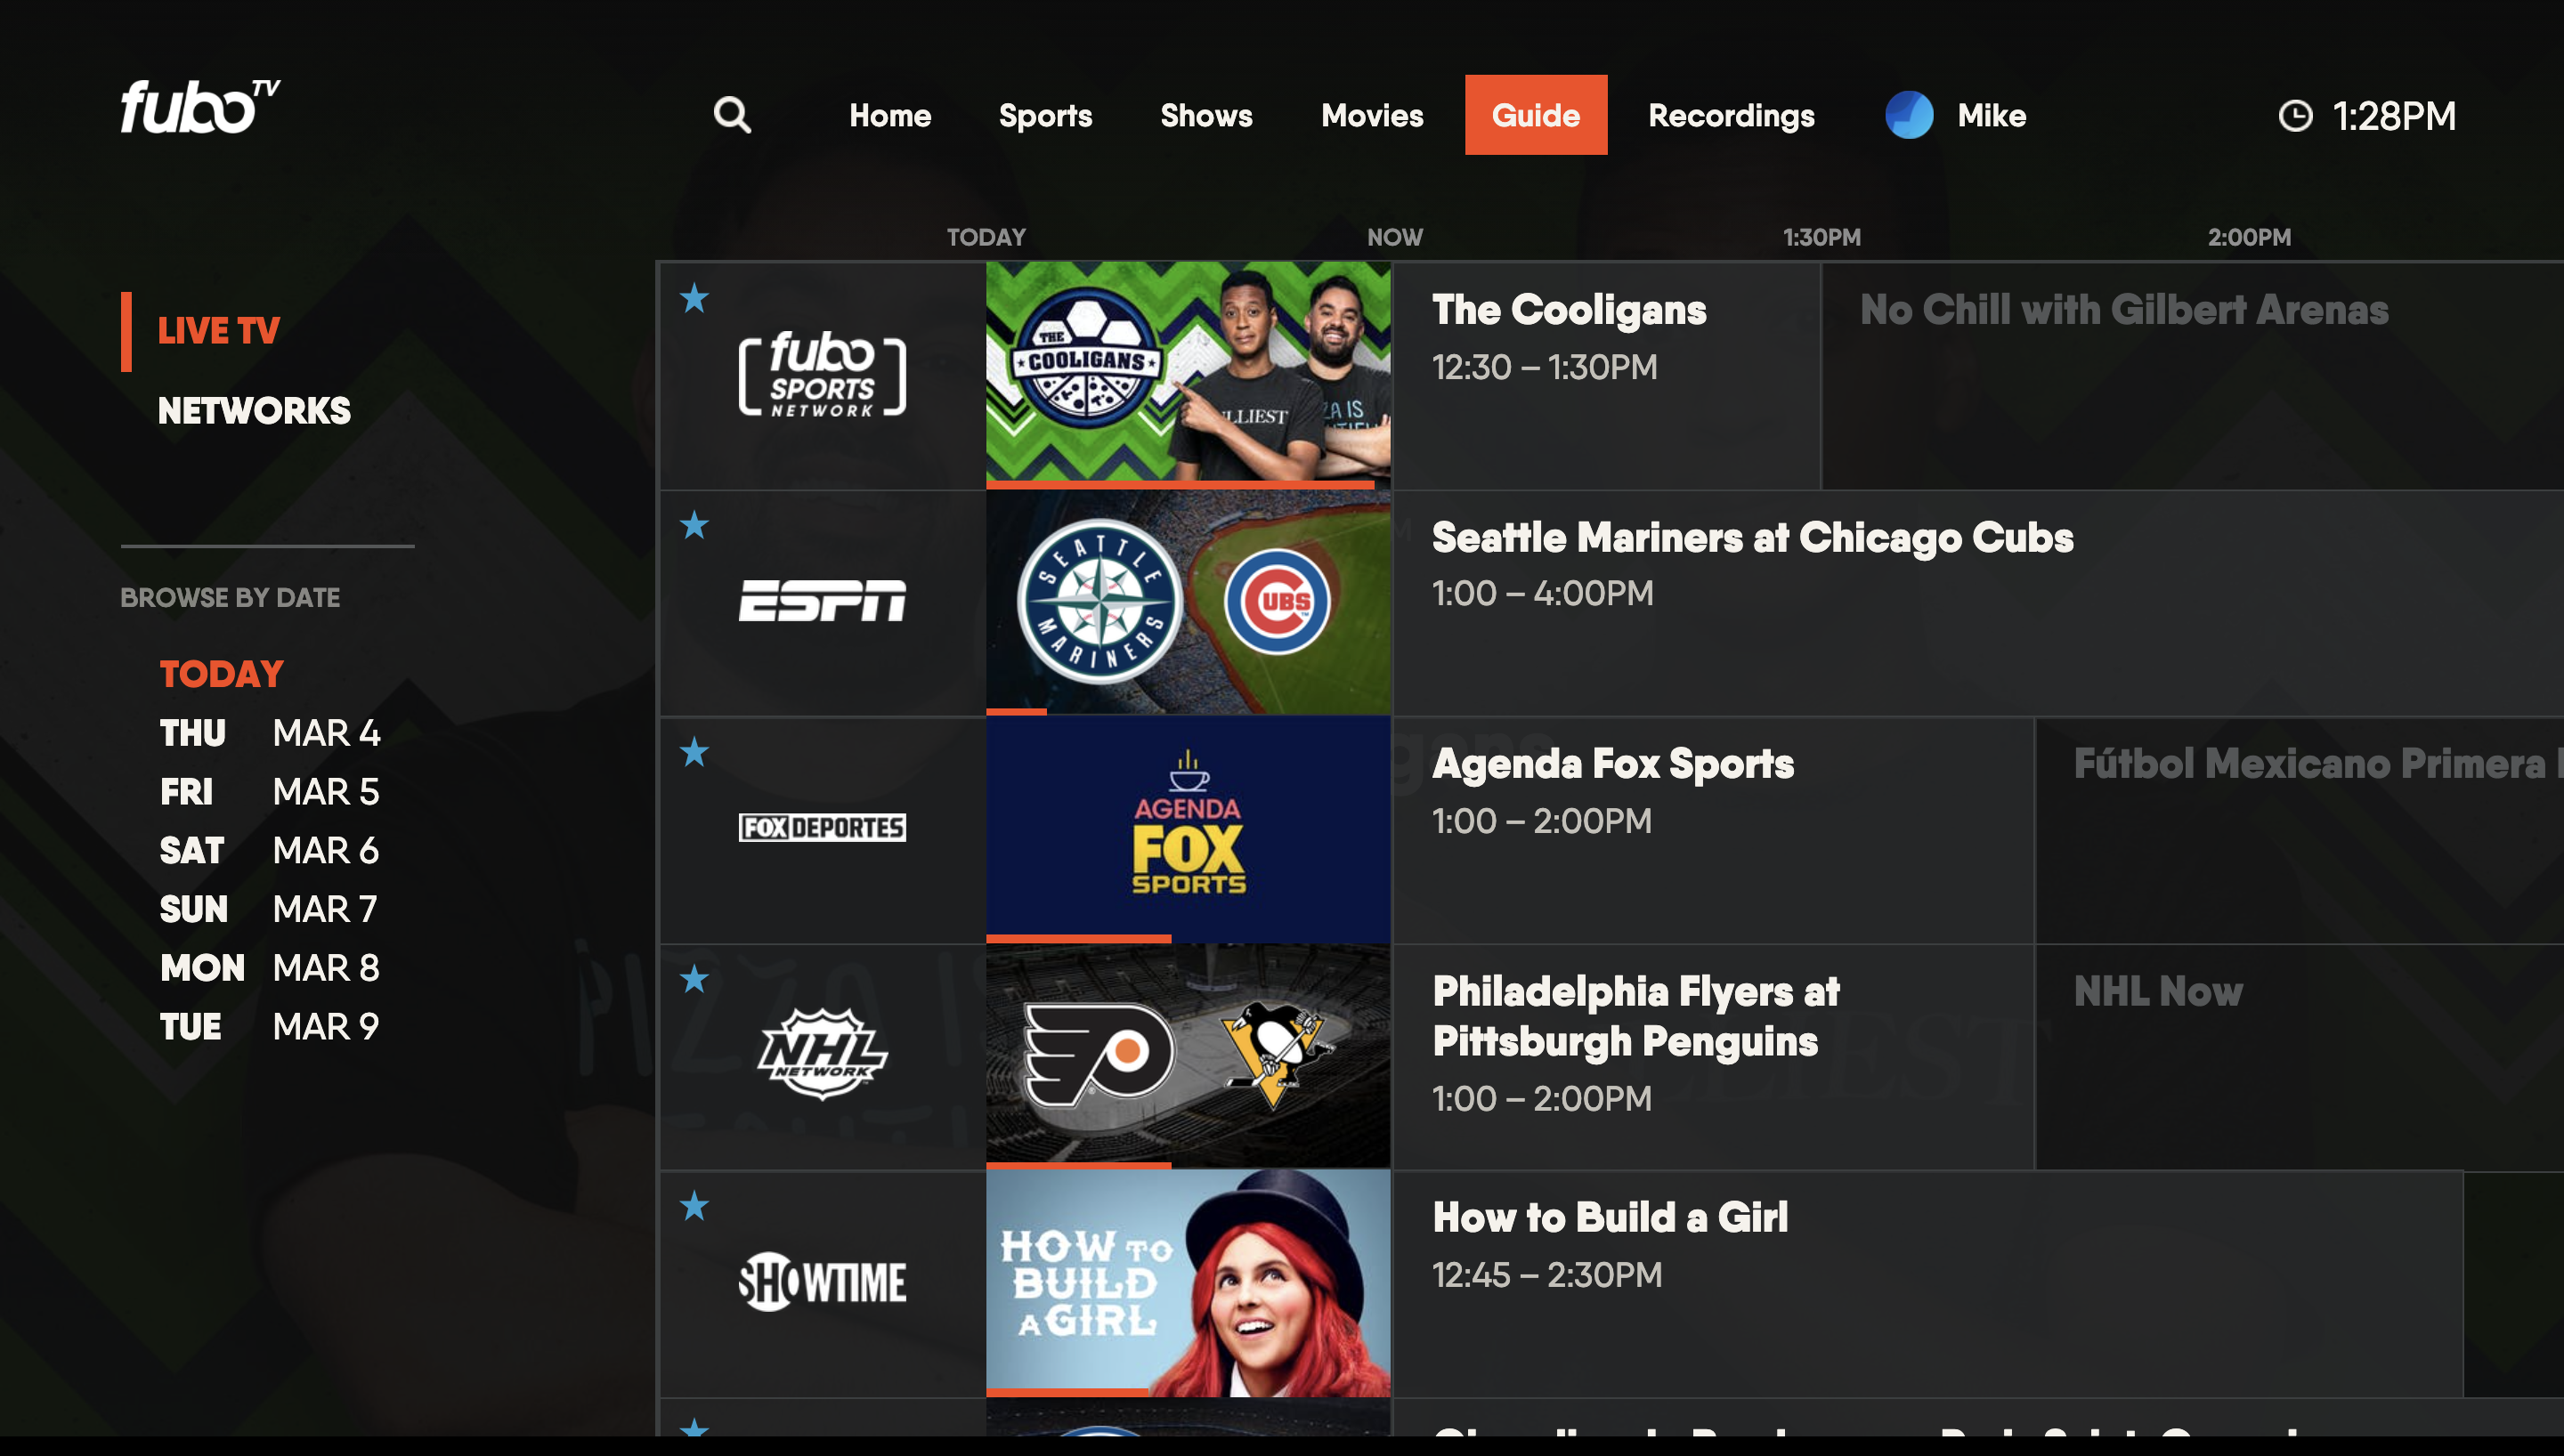 The GUIDE screen of the FuboTV app on a Samsung TV